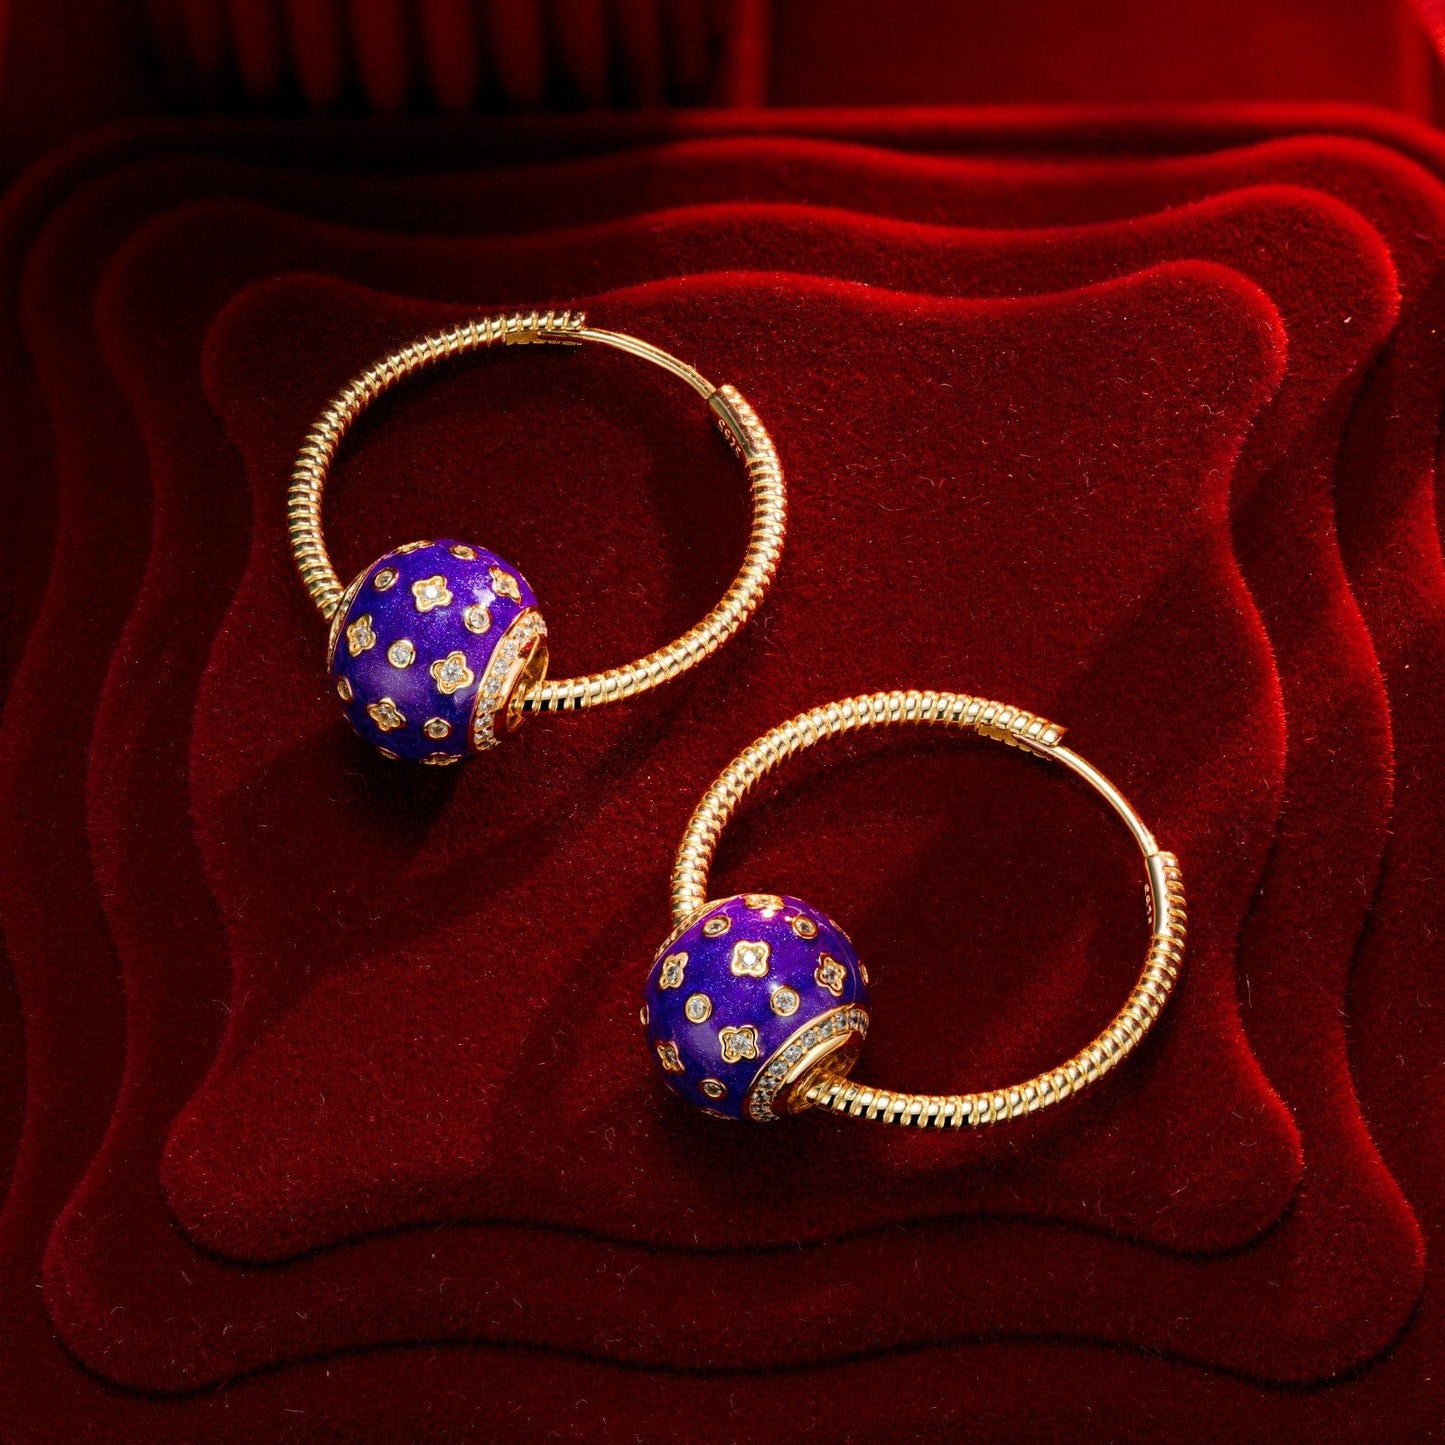 Purple Clover Tarnish-resistant Silver Charms Earrings Set with Sterling Silver Ear Post With Enamel In 14K Gold Plated